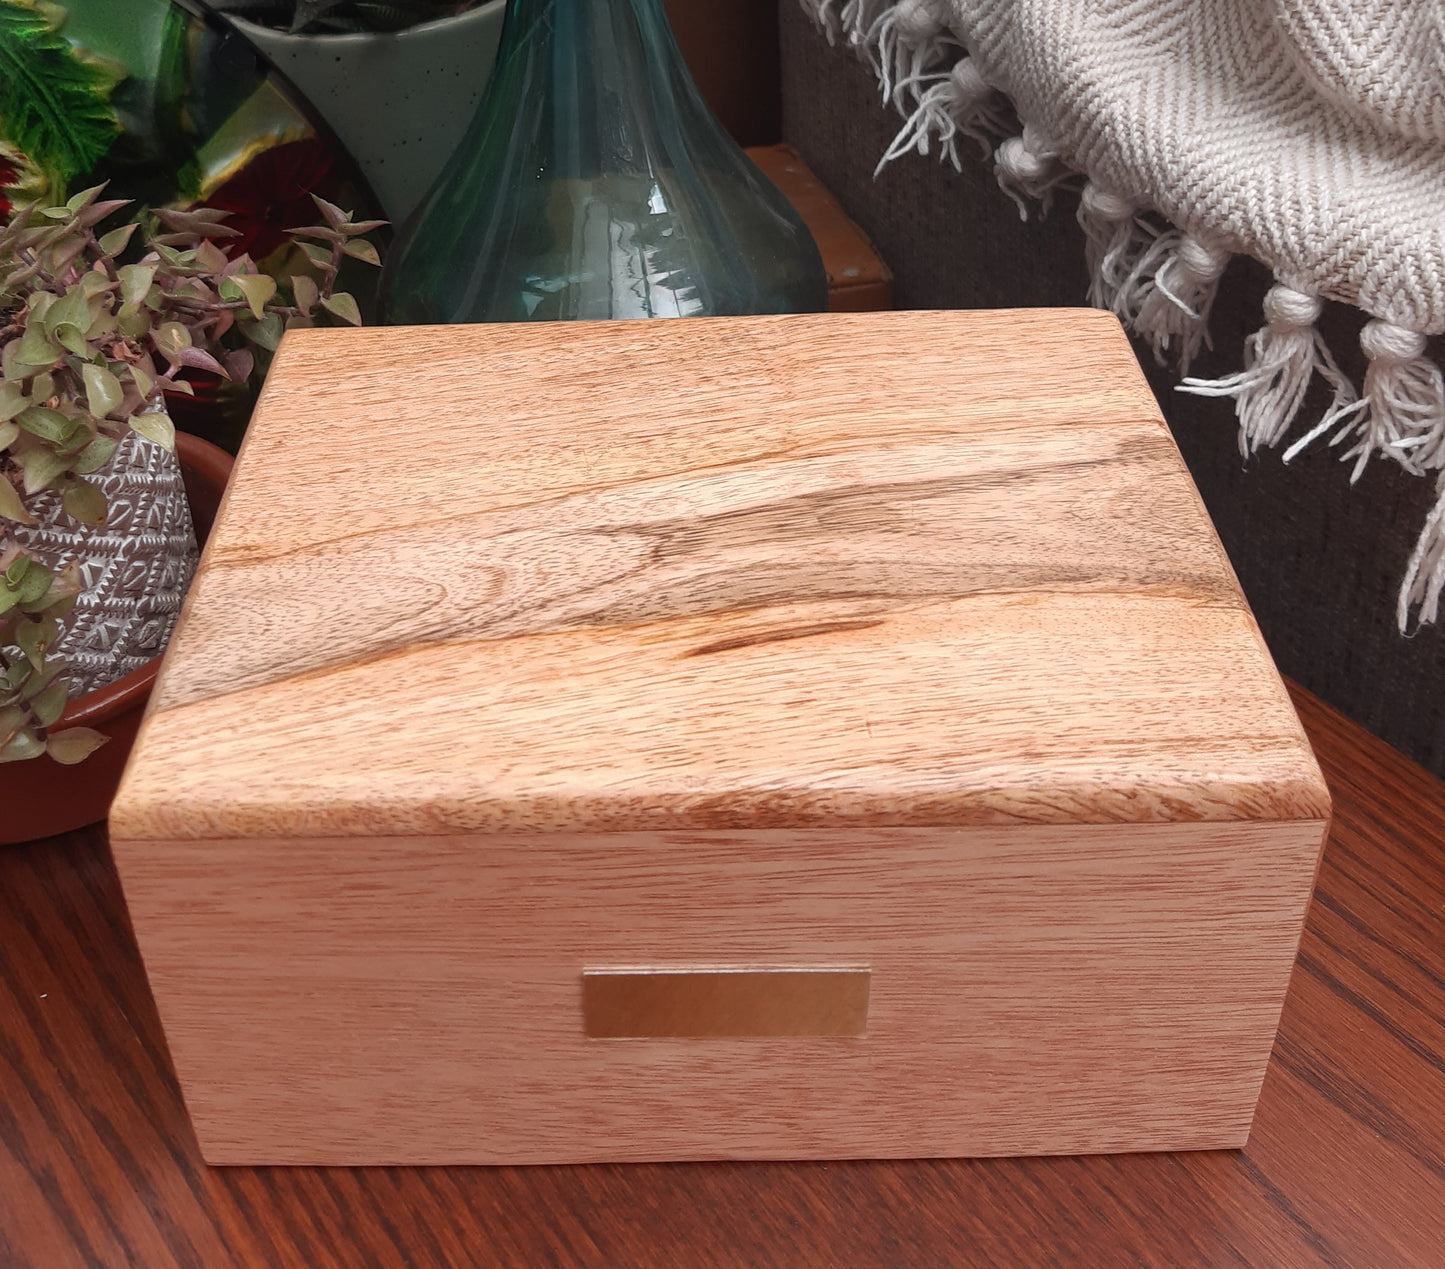 Large Wooden Pet Cremation Urn With Engraved Name Plate (light finish)